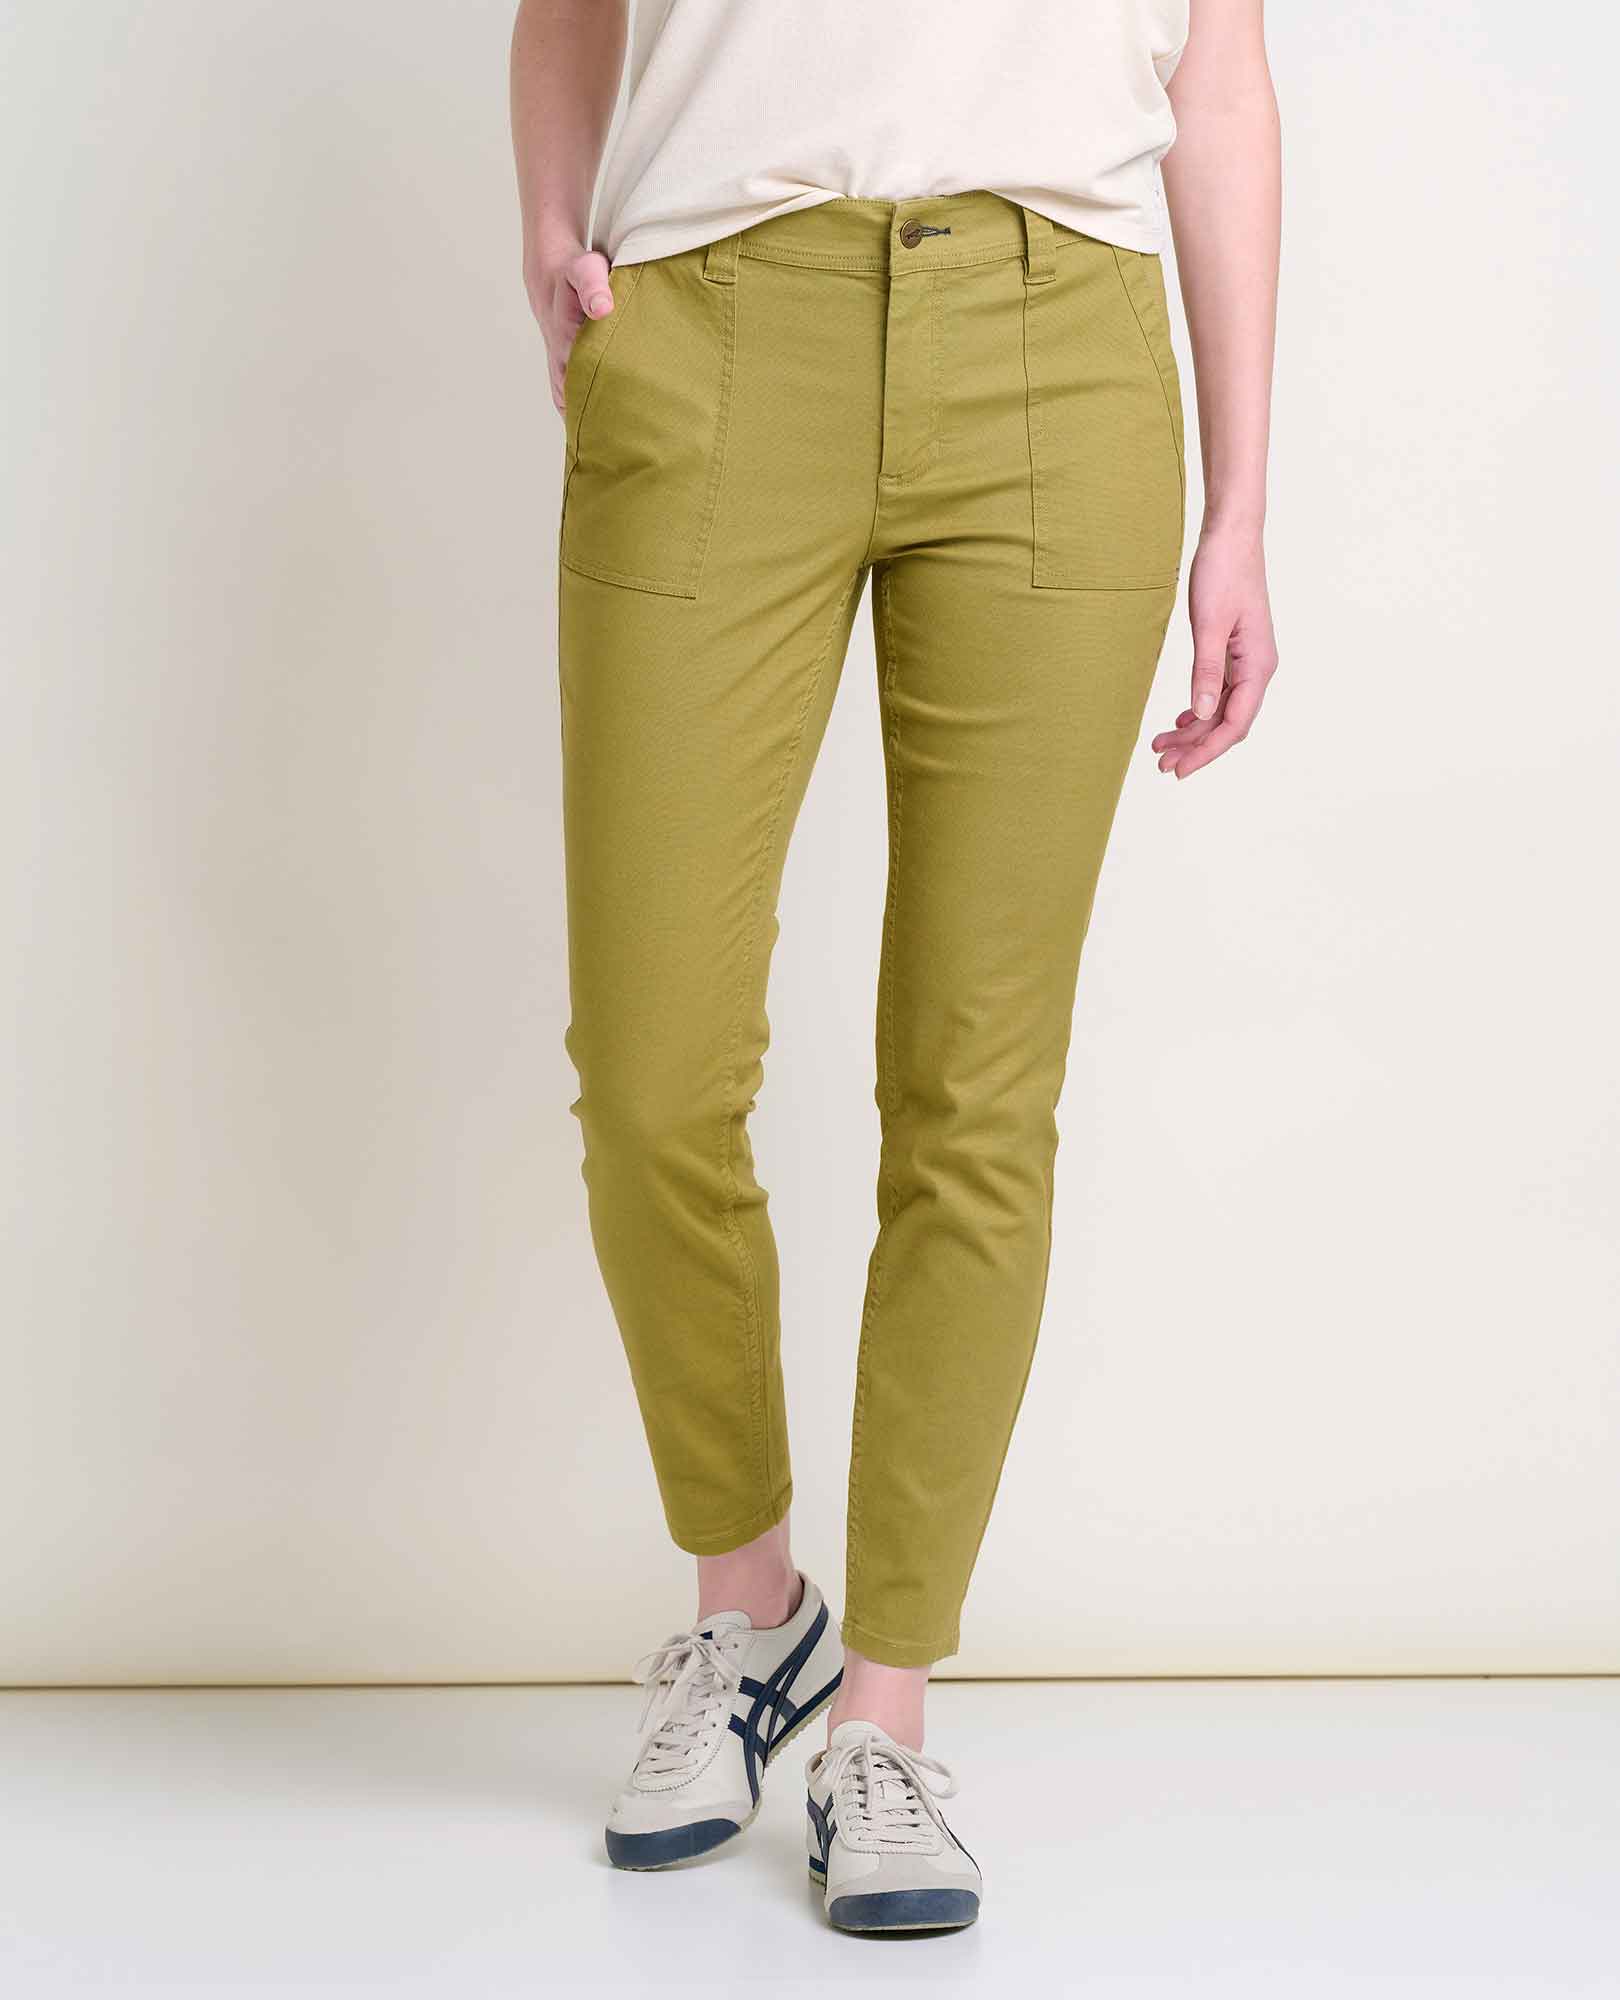 6 Pocket Cargo Trouser for Women and Girls Soft Cotton Slim Fit { NEXT WEAR  }